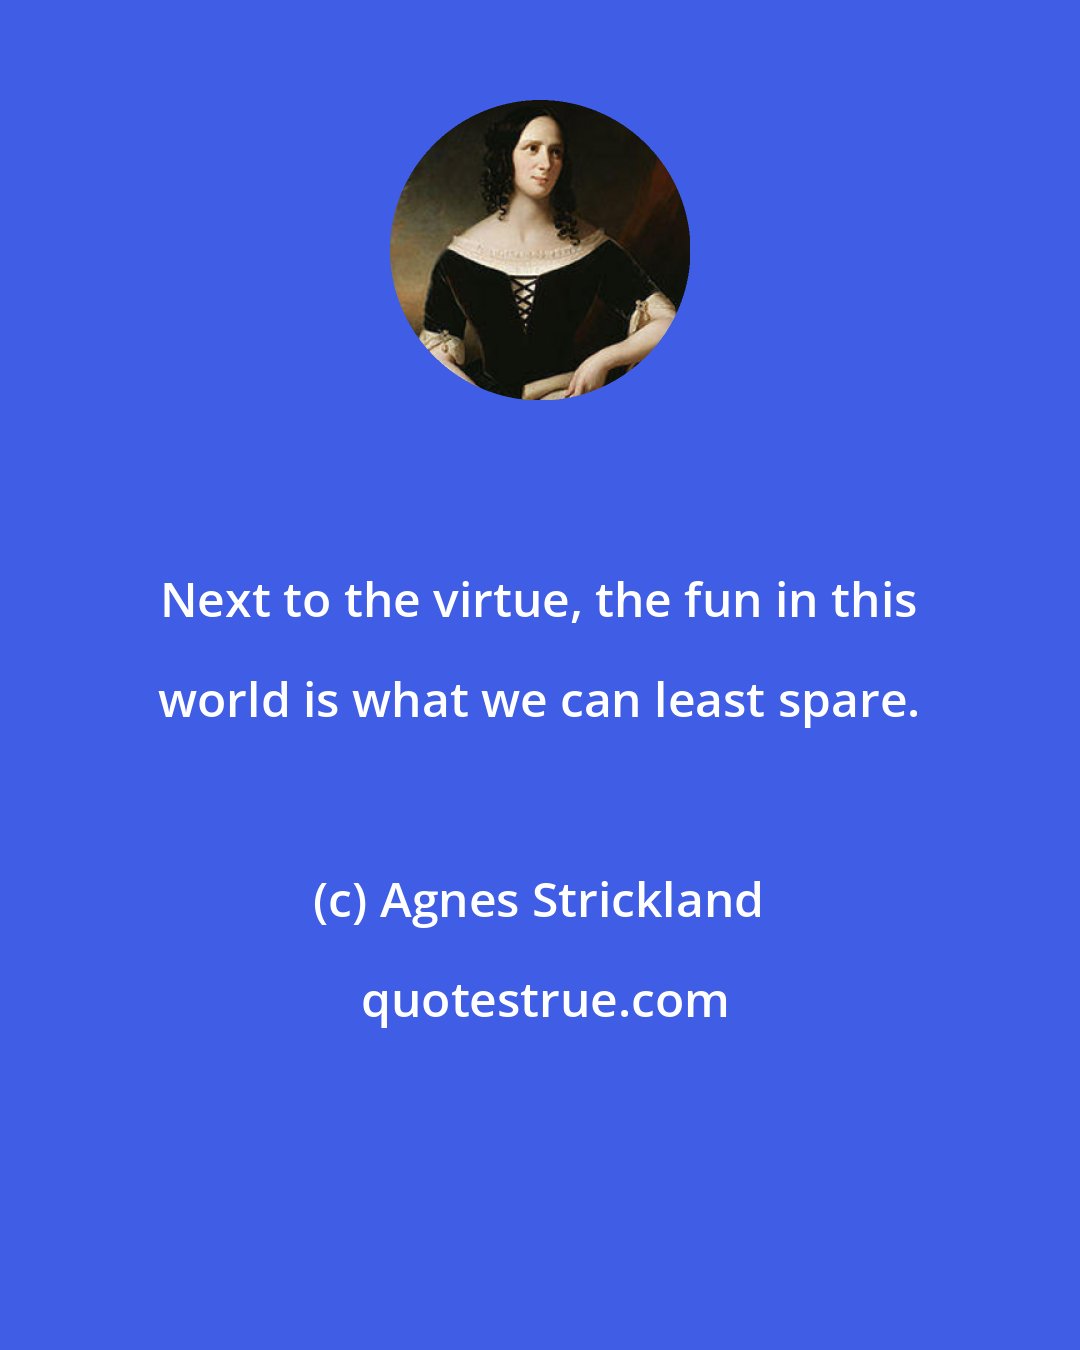 Agnes Strickland: Next to the virtue, the fun in this world is what we can least spare.